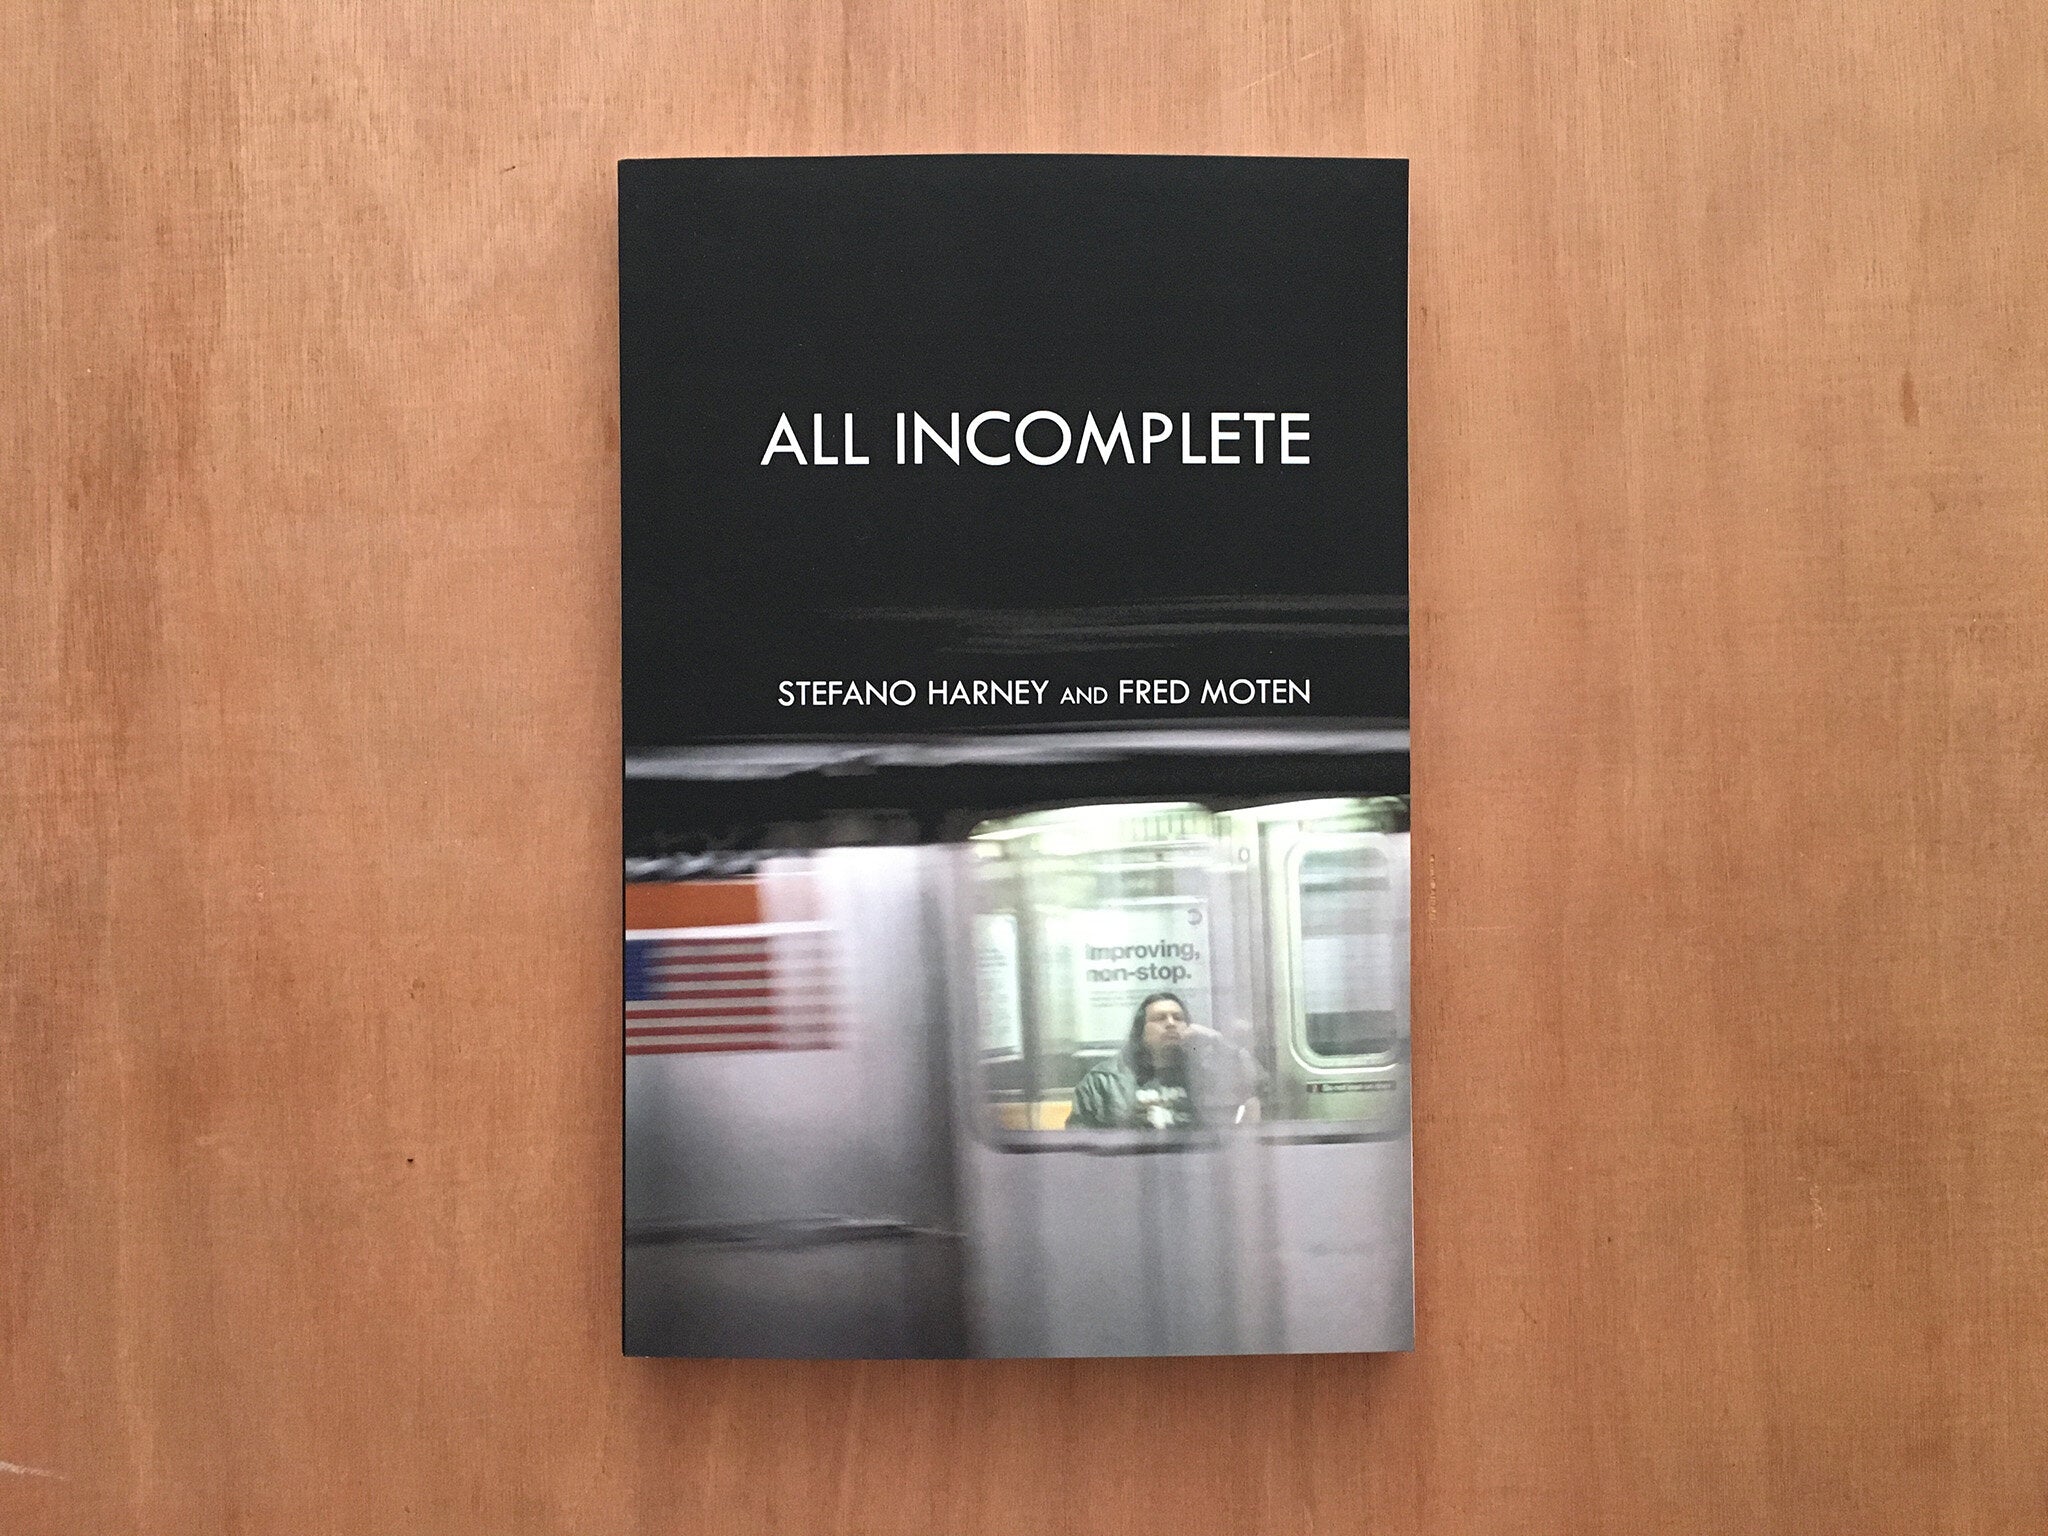 ALL INCOMPLETE by Stefano Harney and Fred Moten